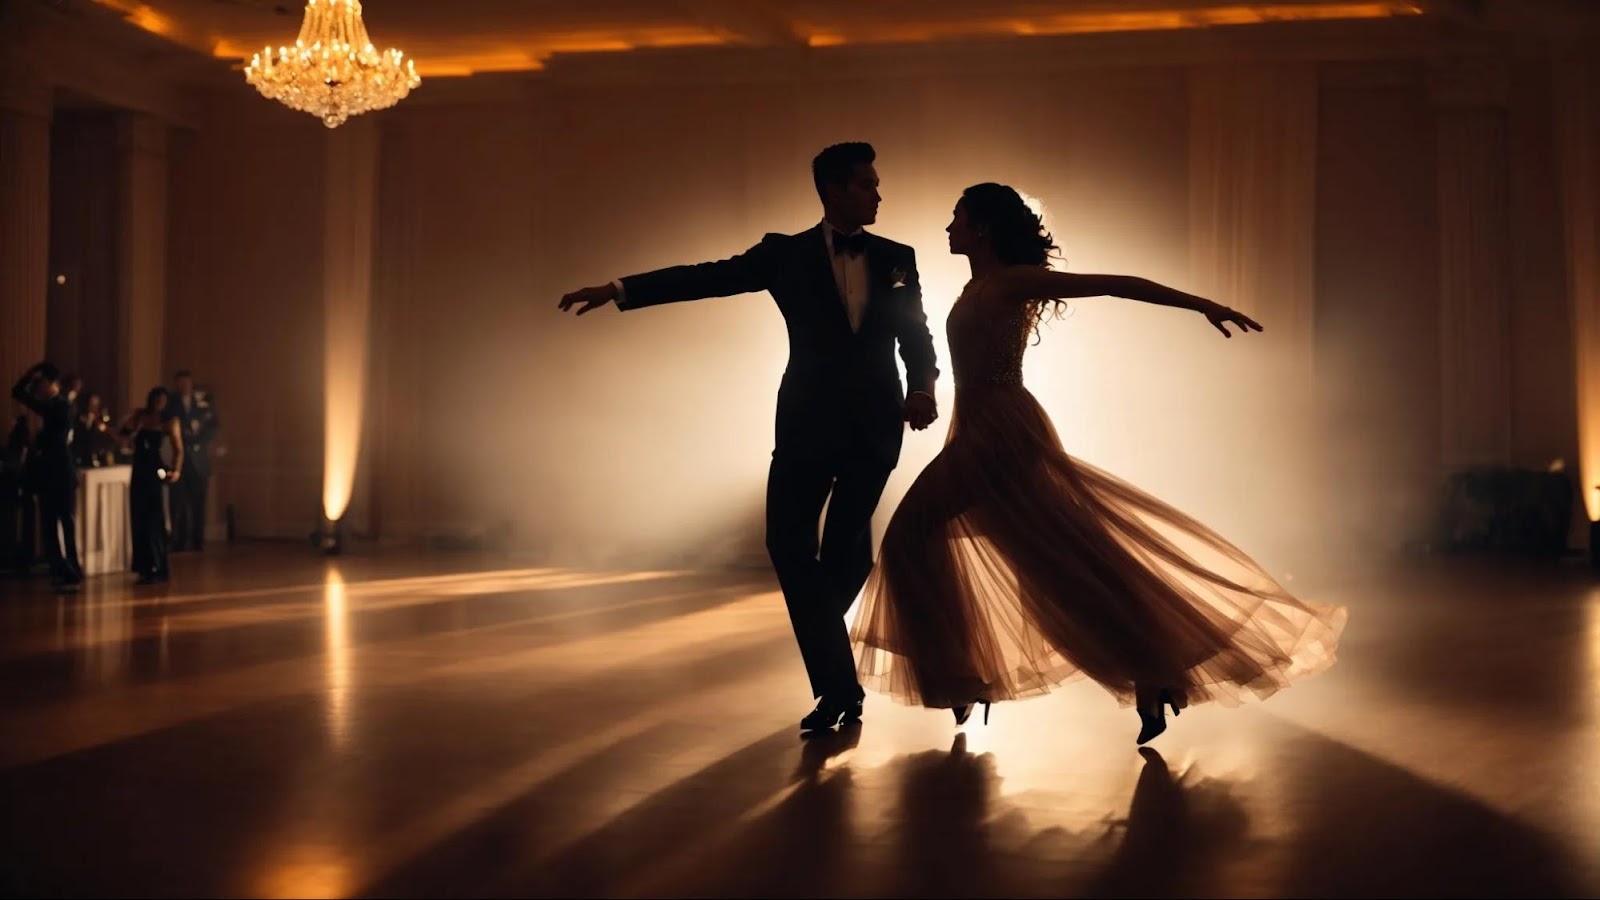 two ballroom dancers glide across a polished dance floor, their silhouettes bathed in soft, dramatic lighting.